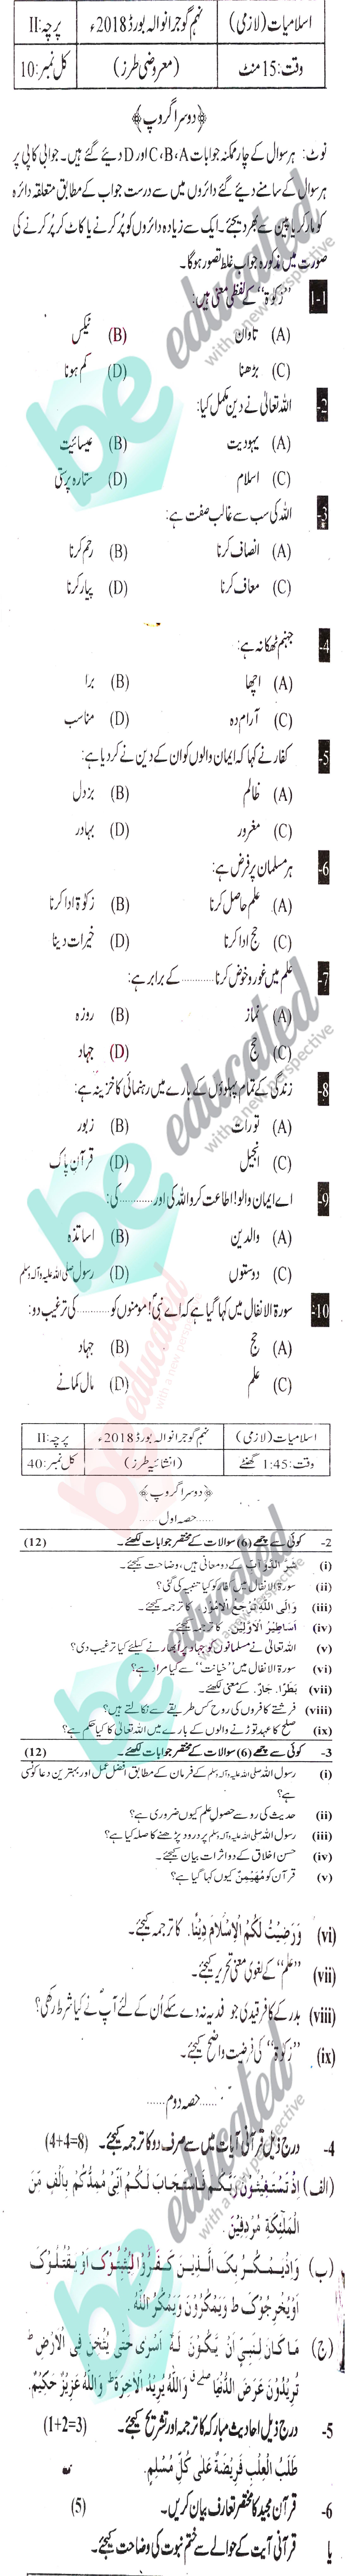 Islamiat (Compulsory) 9th class Past Paper Group 2 BISE Gujranwala 2018